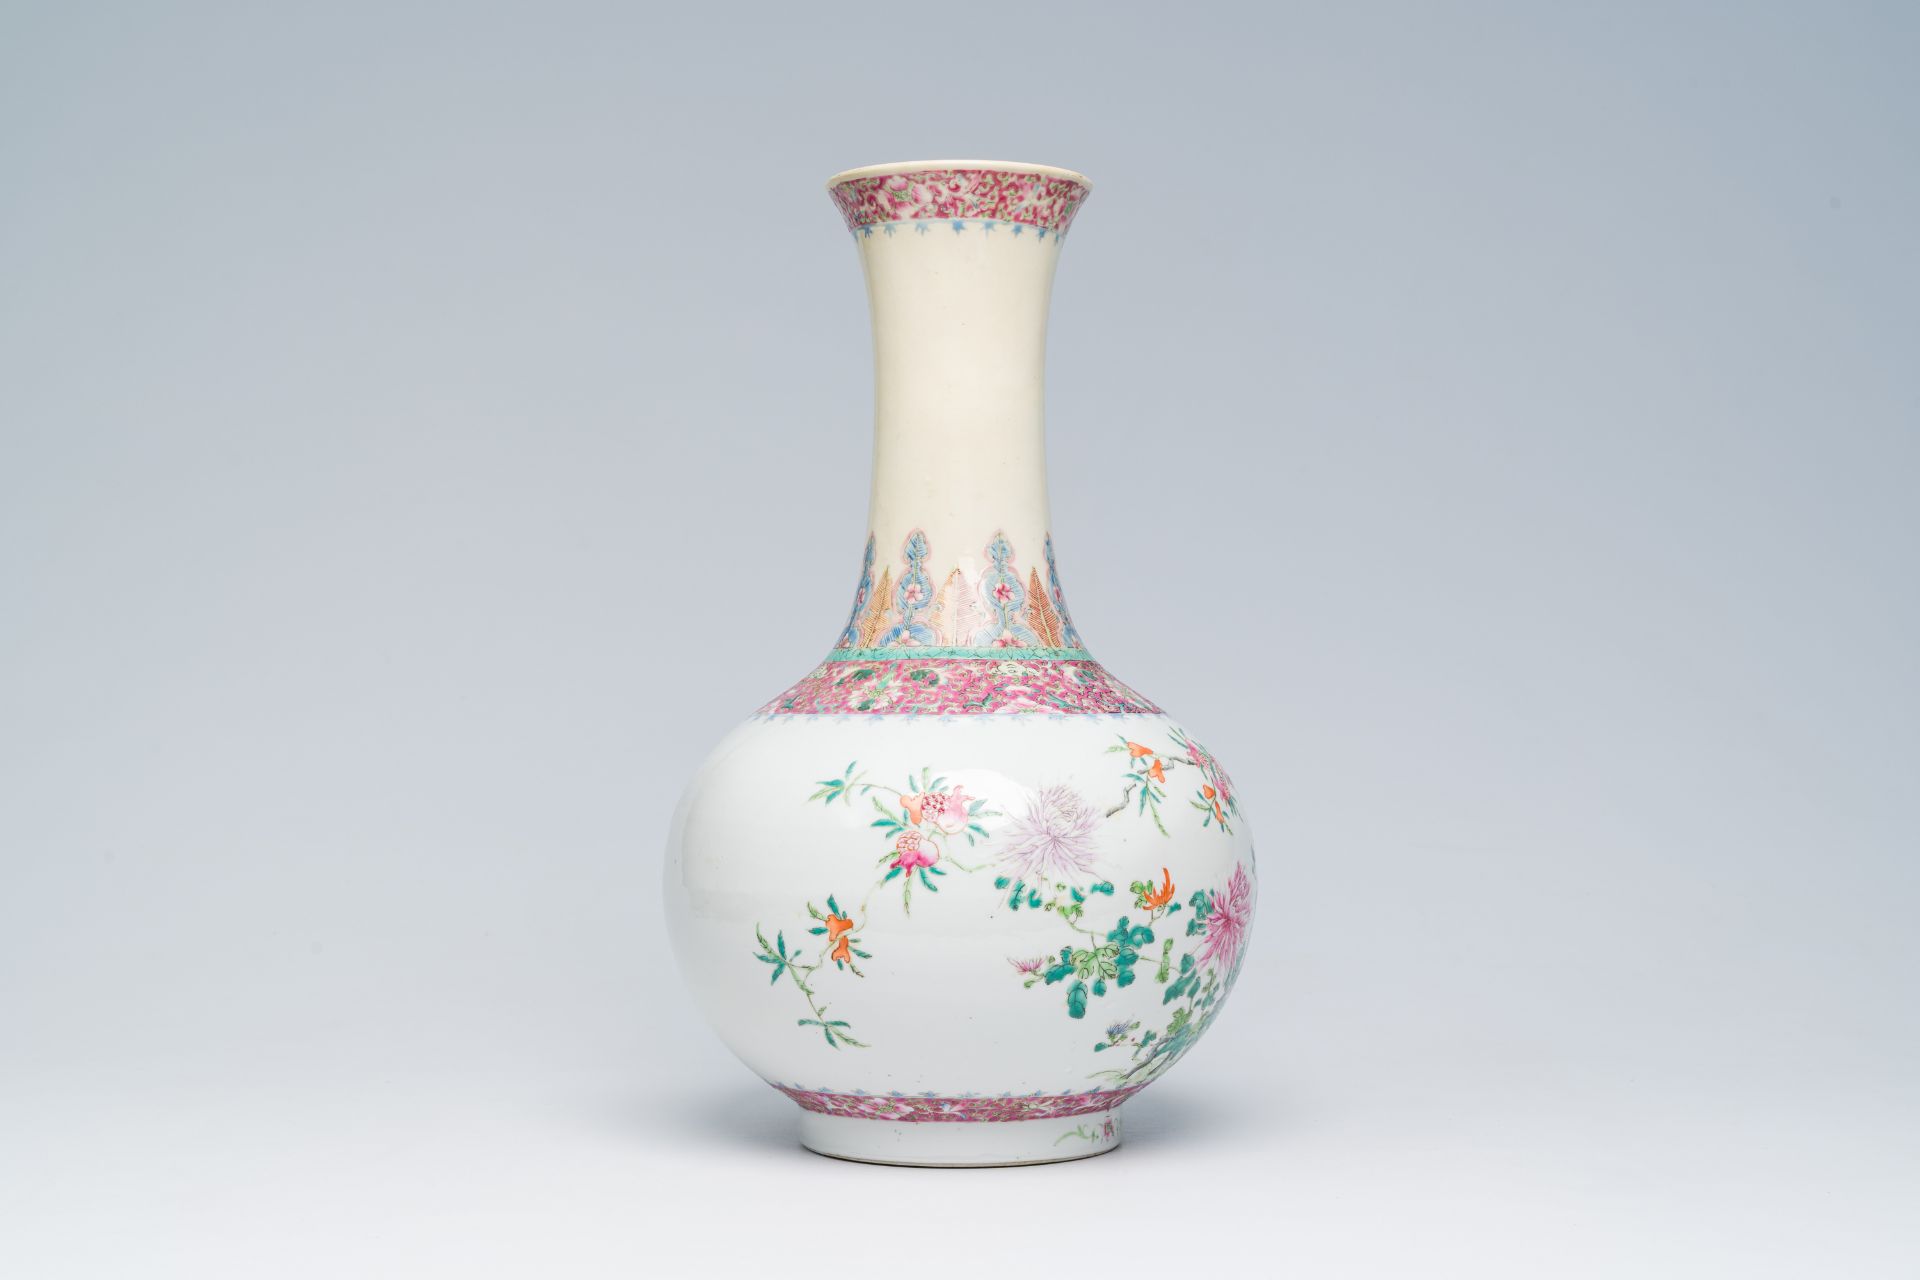 A Chinese famille rose bottle shaped vase with floral design, Hongxian mark, 20th C. - Image 4 of 6